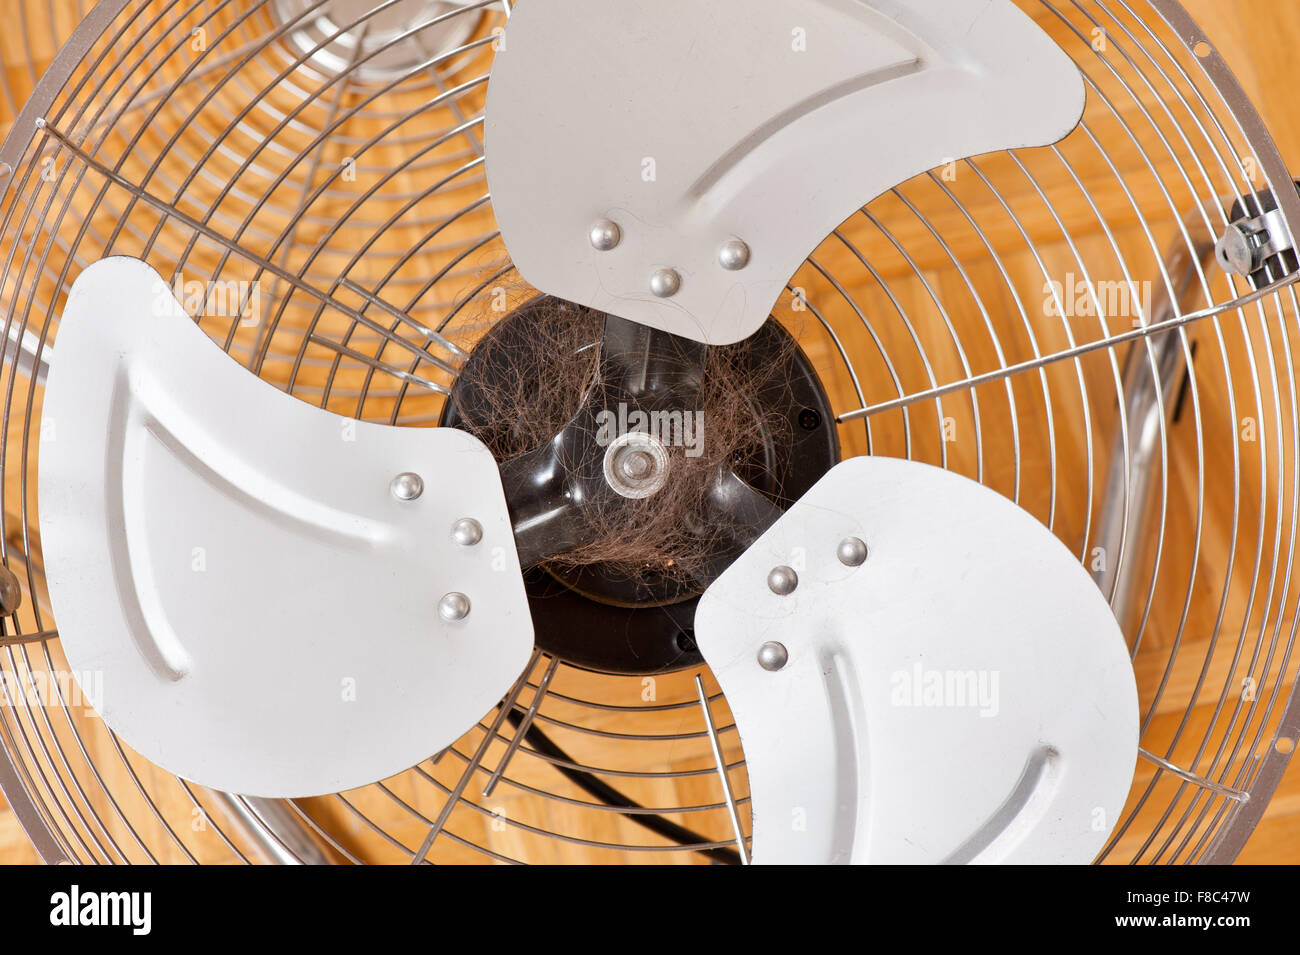 Hair tangled in a fan, household electric floor chrome fan machine with turning vanes making comfortable airflow, object dirty Stock Photo